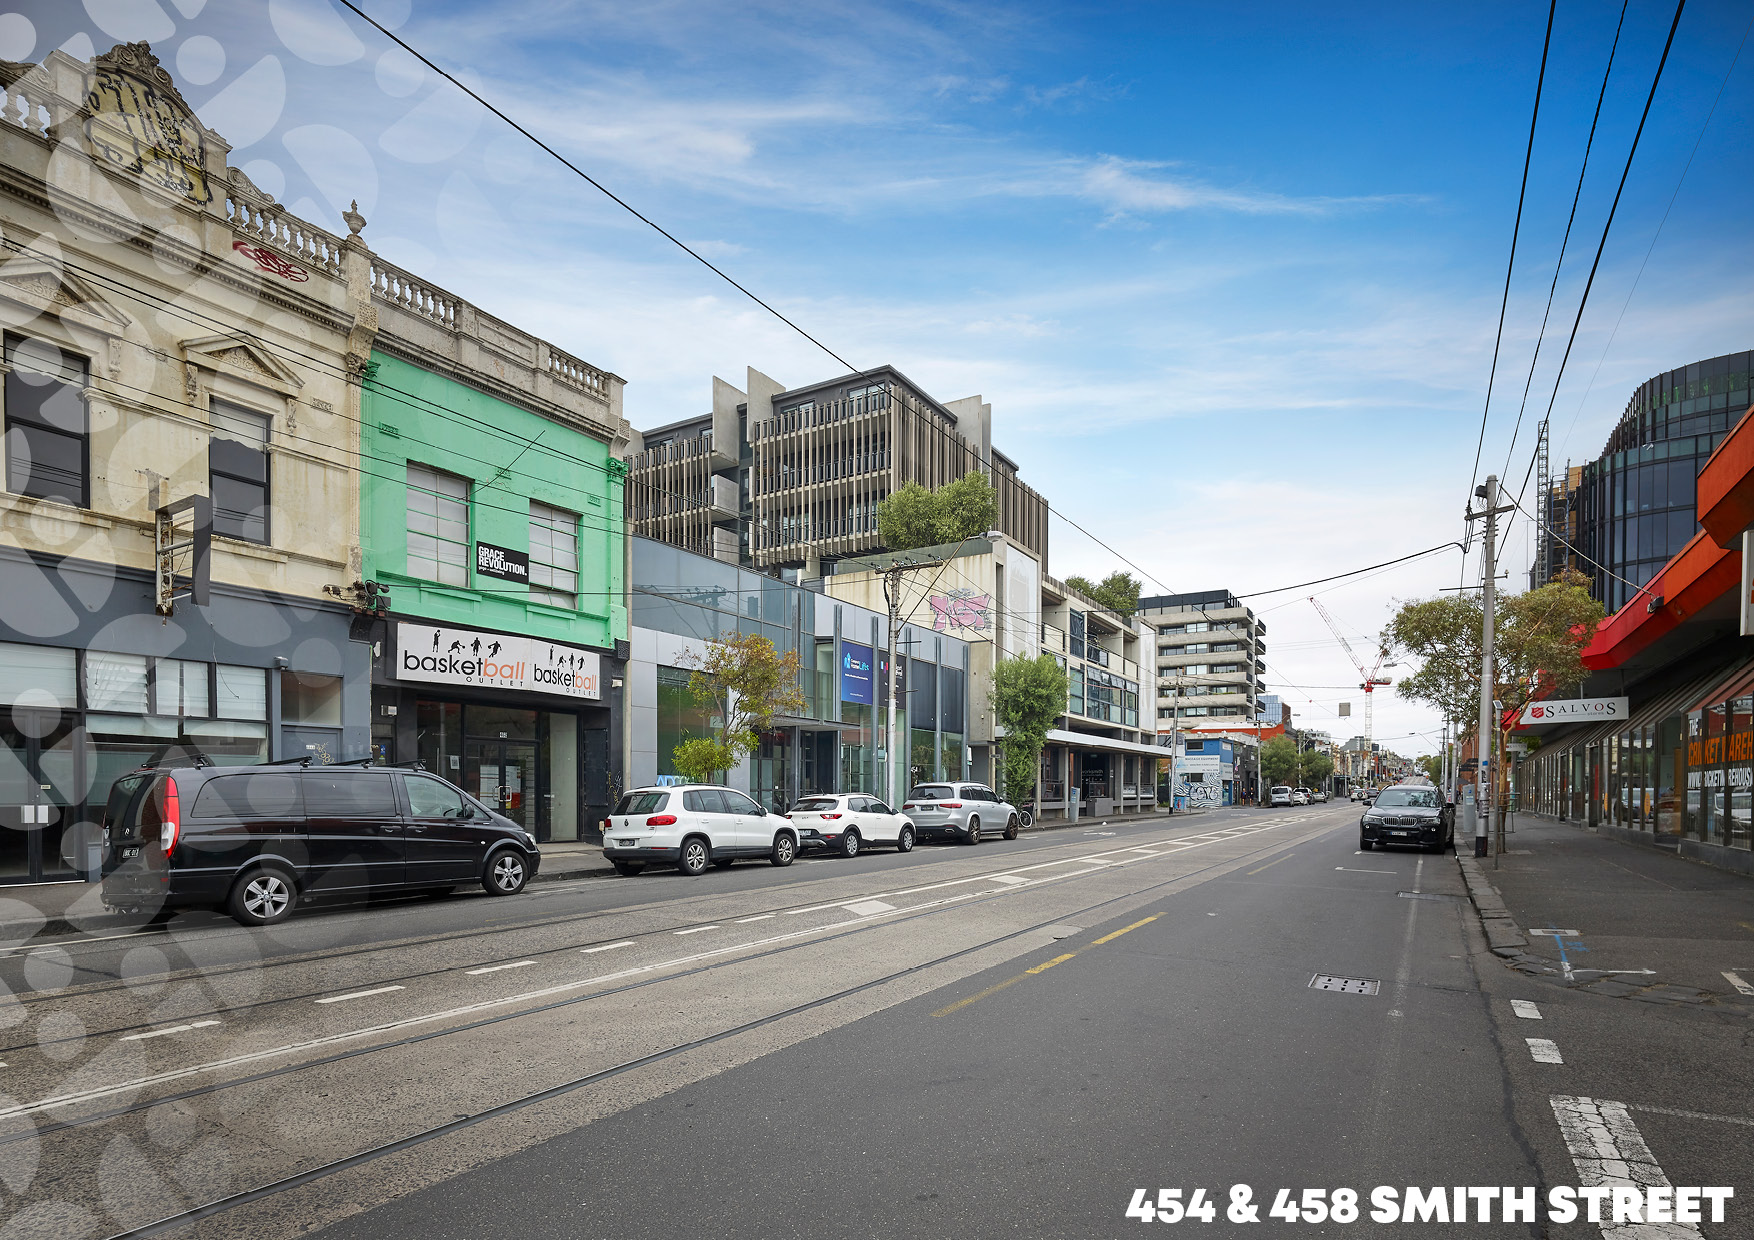 The Collingwood Collection TCI Lease Leased 55 Emma Street 5-9 Alexandra Parade 456 & 458 Smith Street